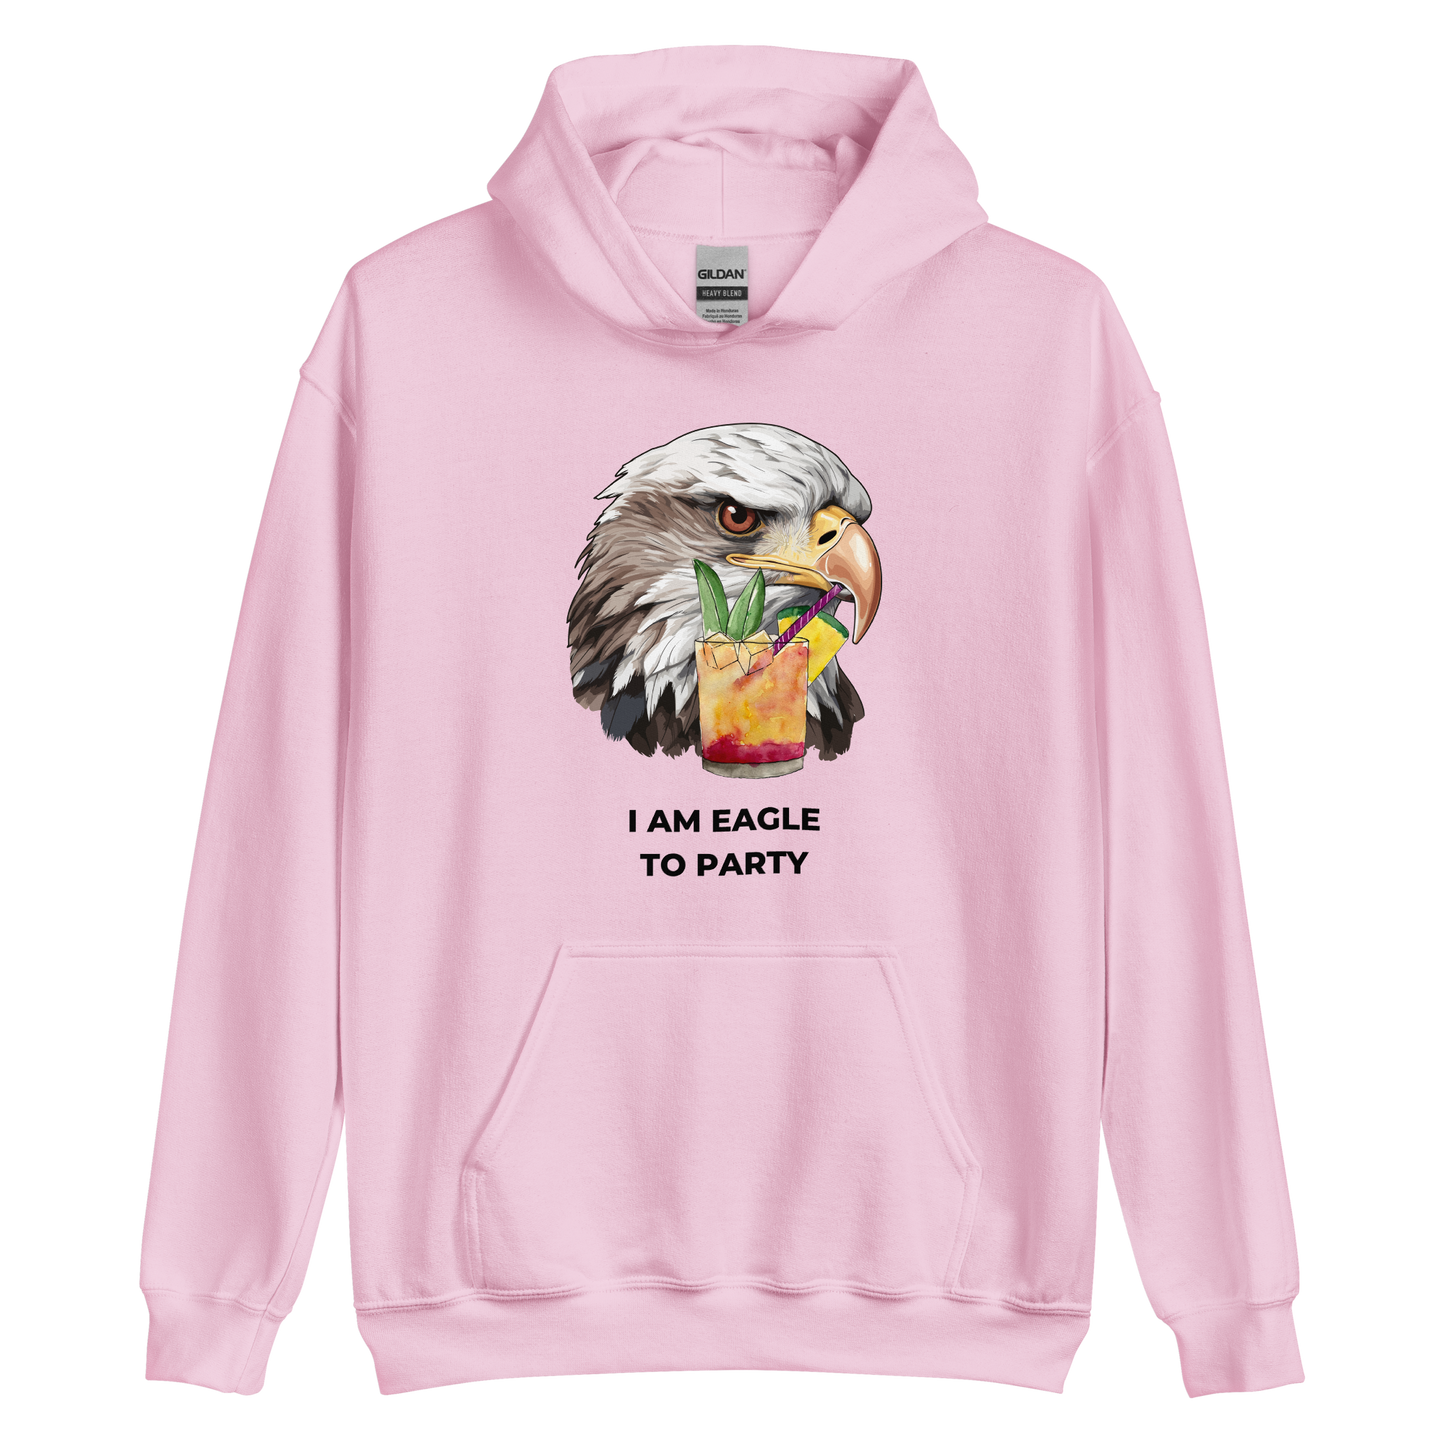 Light Pink Eagle Hoodie featuring a captivating I Am Eagle To Party graphic on the chest - Funny Graphic Eagle Party Hoodies - Boozy Fox